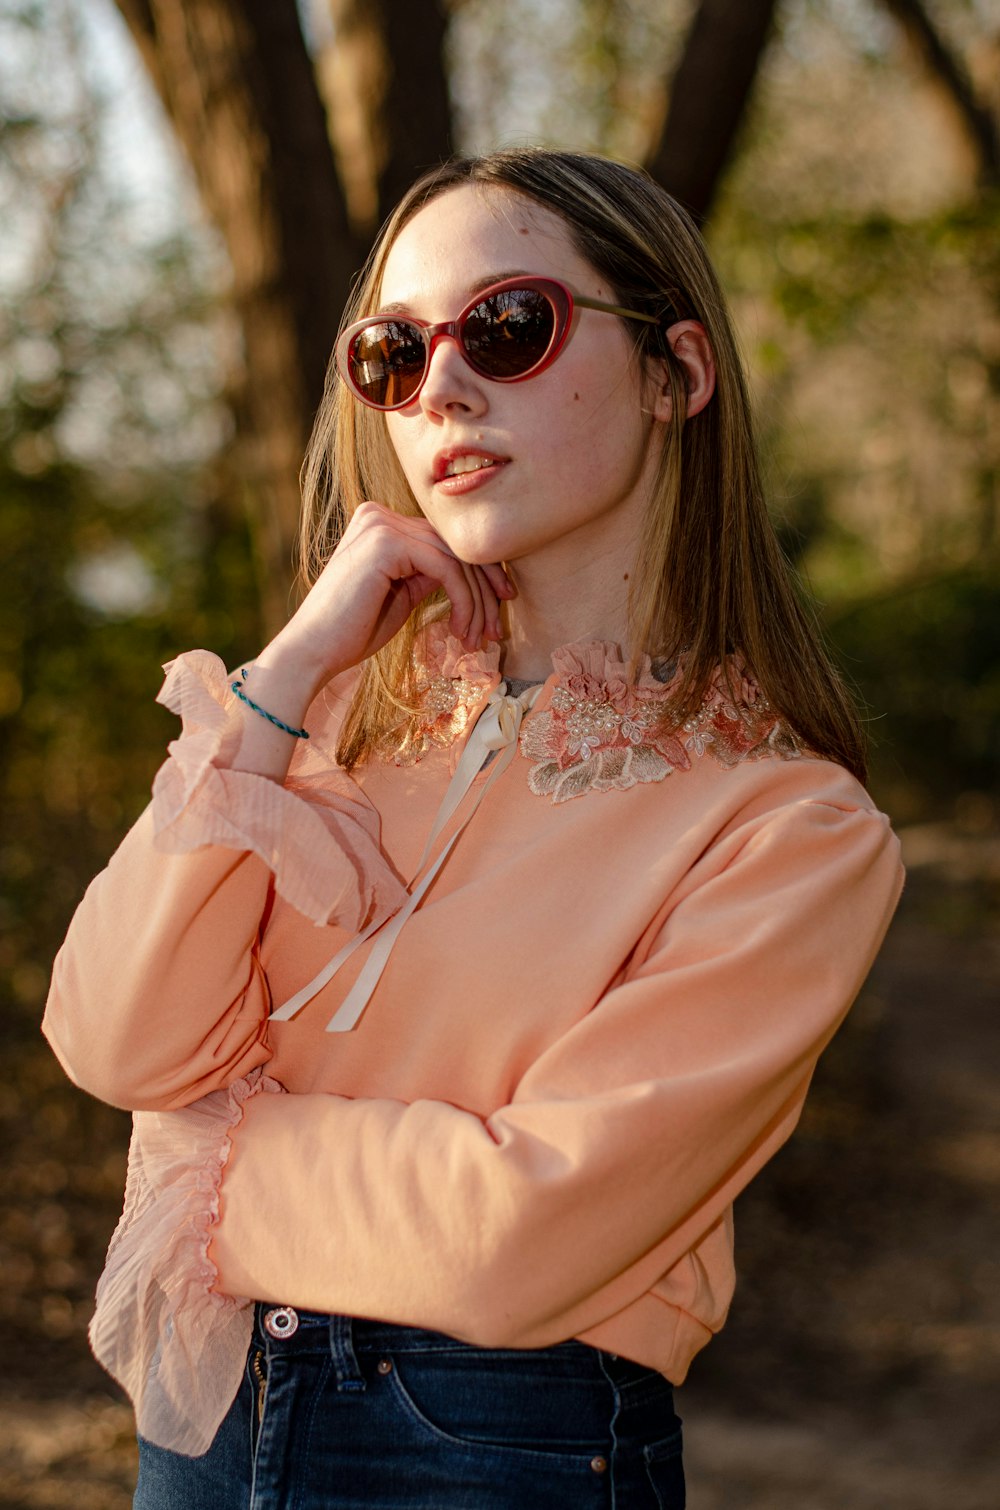 a woman wearing a pink shirt and sunglasses